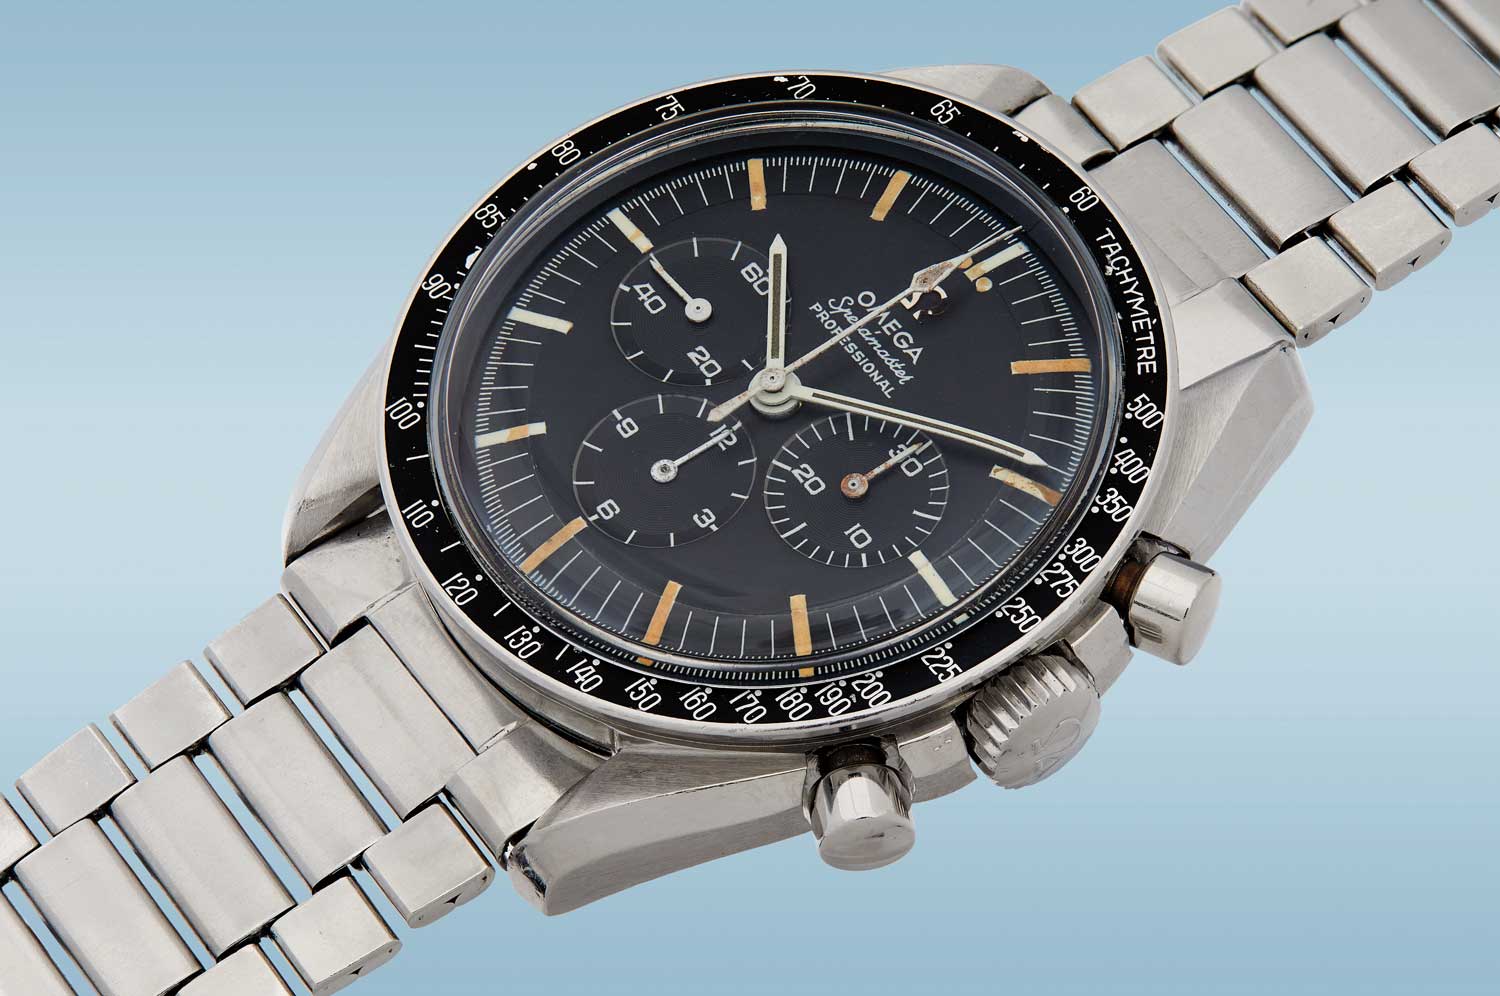 Ralph Ellison's Speedmaster 145.012, offered for auction with Phillips Watches at their 2021 December sale in New York (Image: Phillips.com)